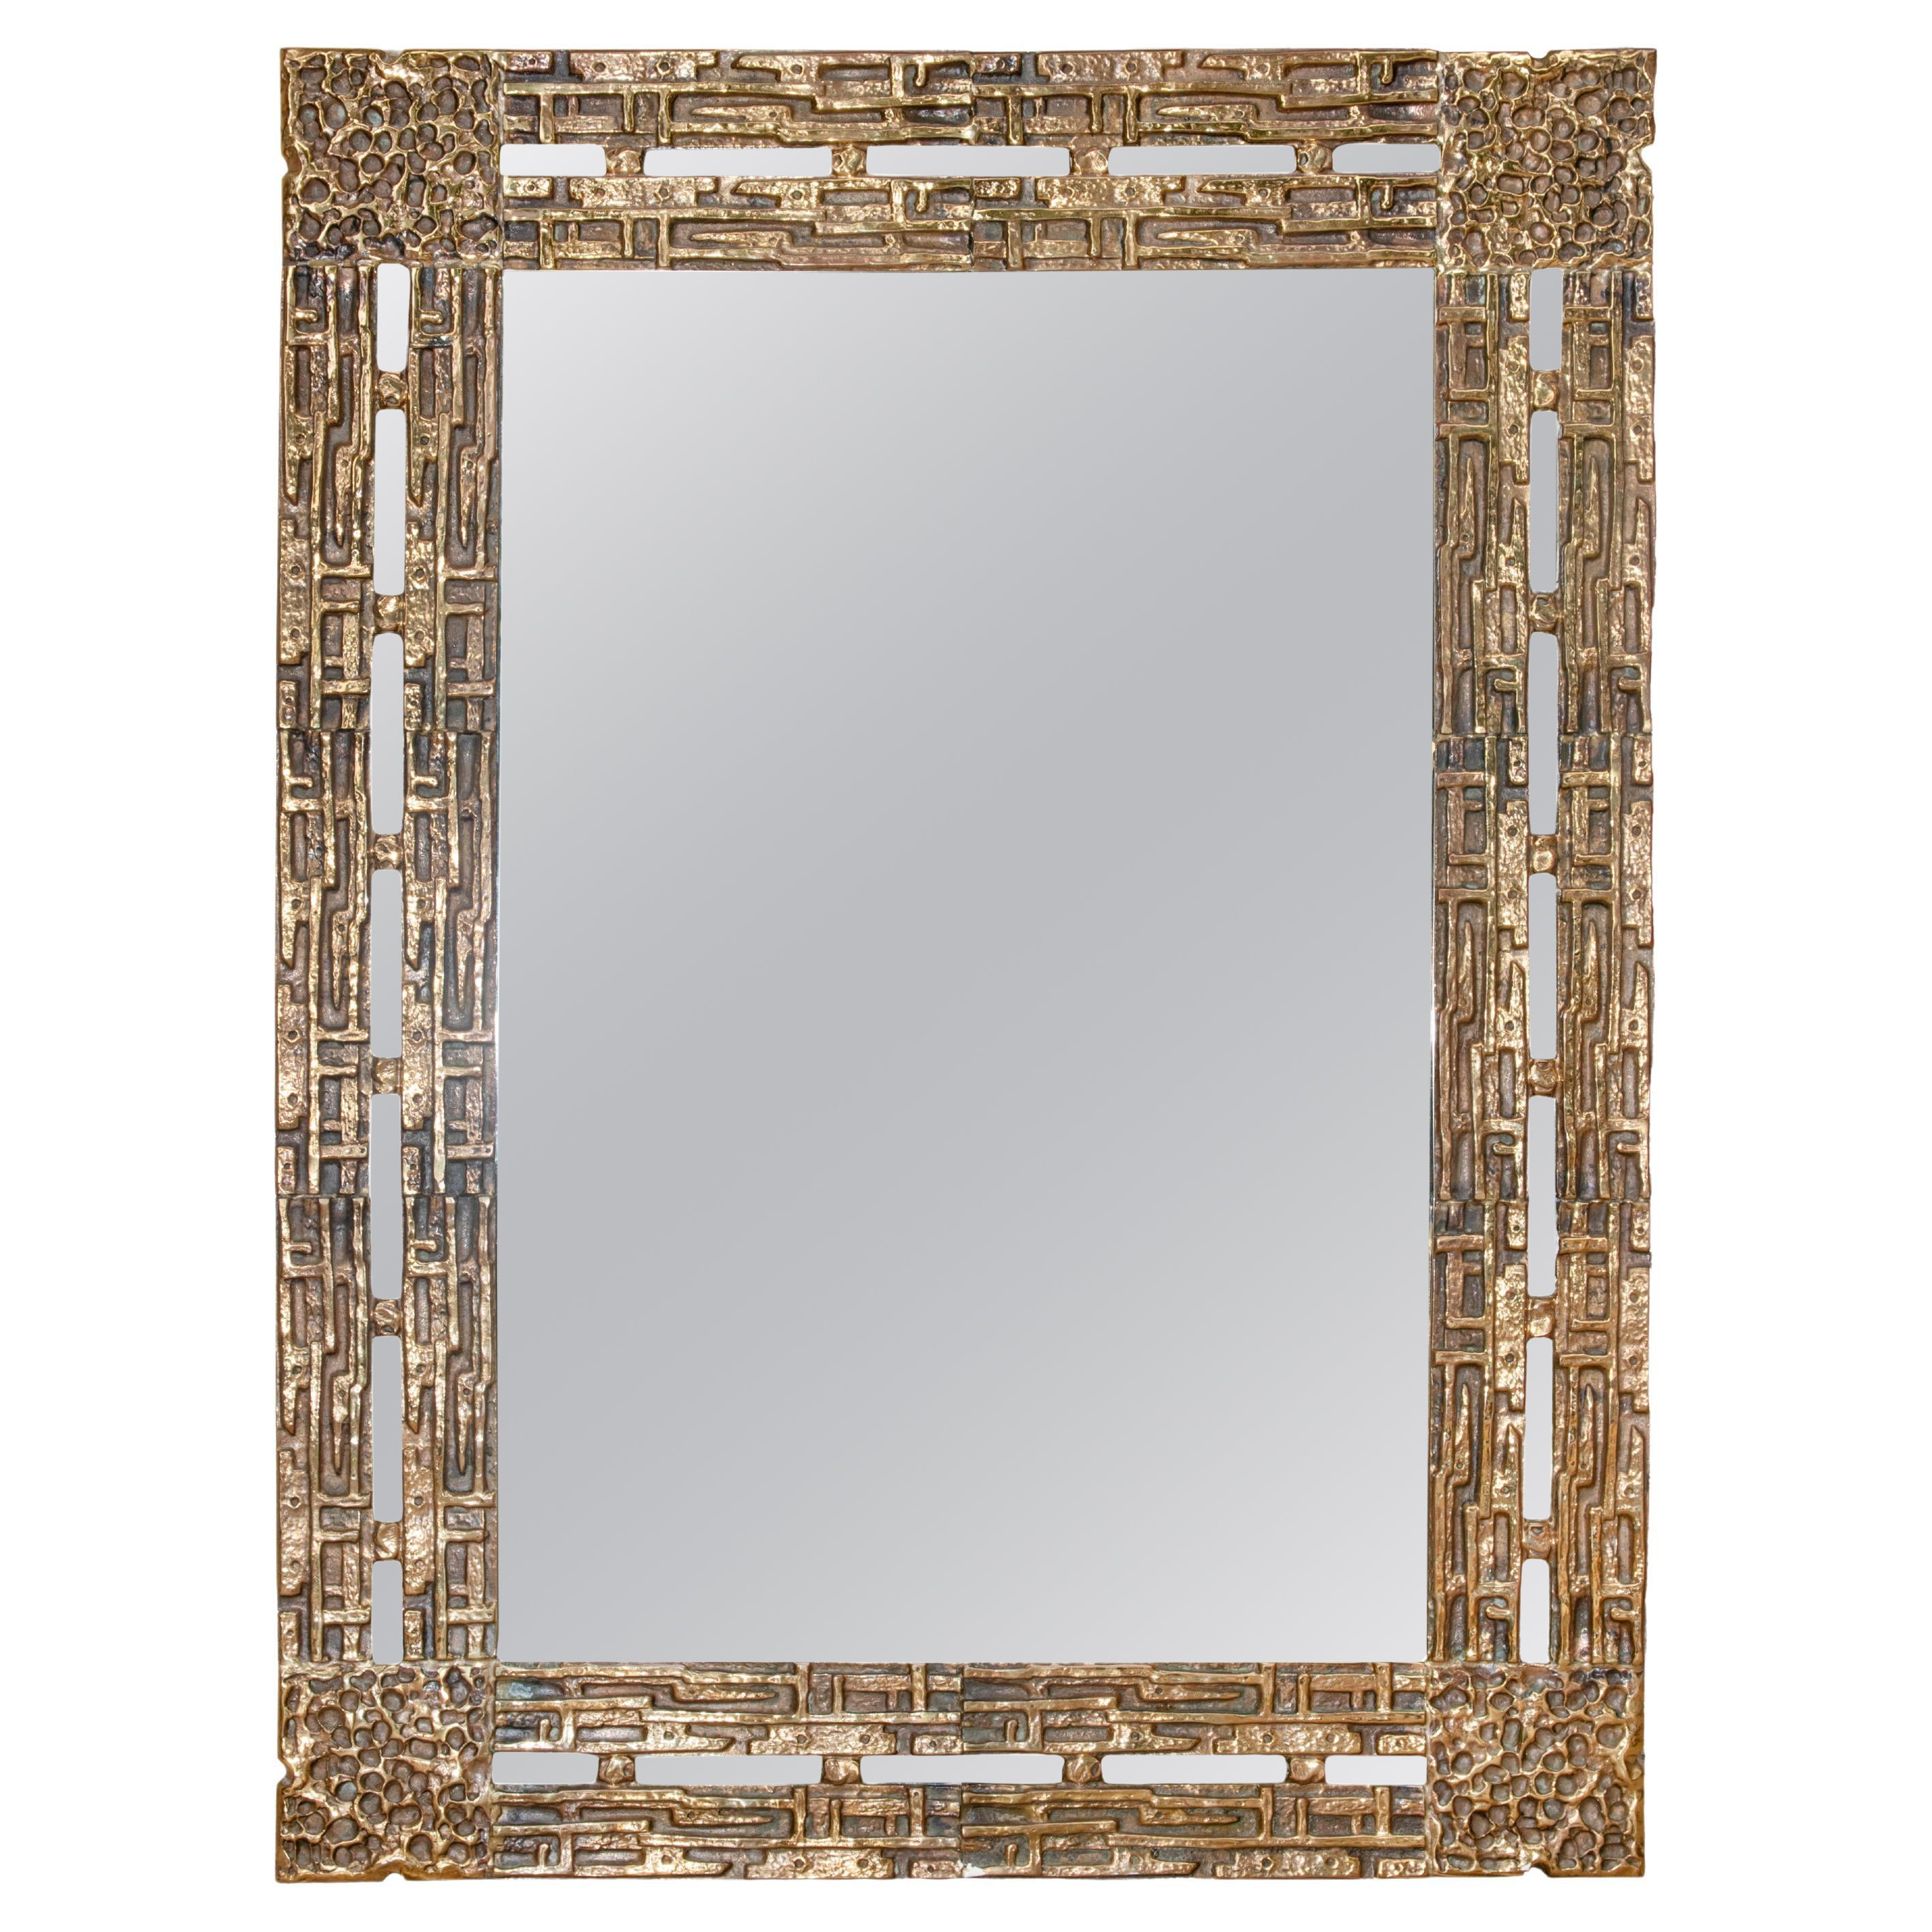 Vintage Brass Square Mirror by Luciano Frigerio, italian production, 1960s For Sale